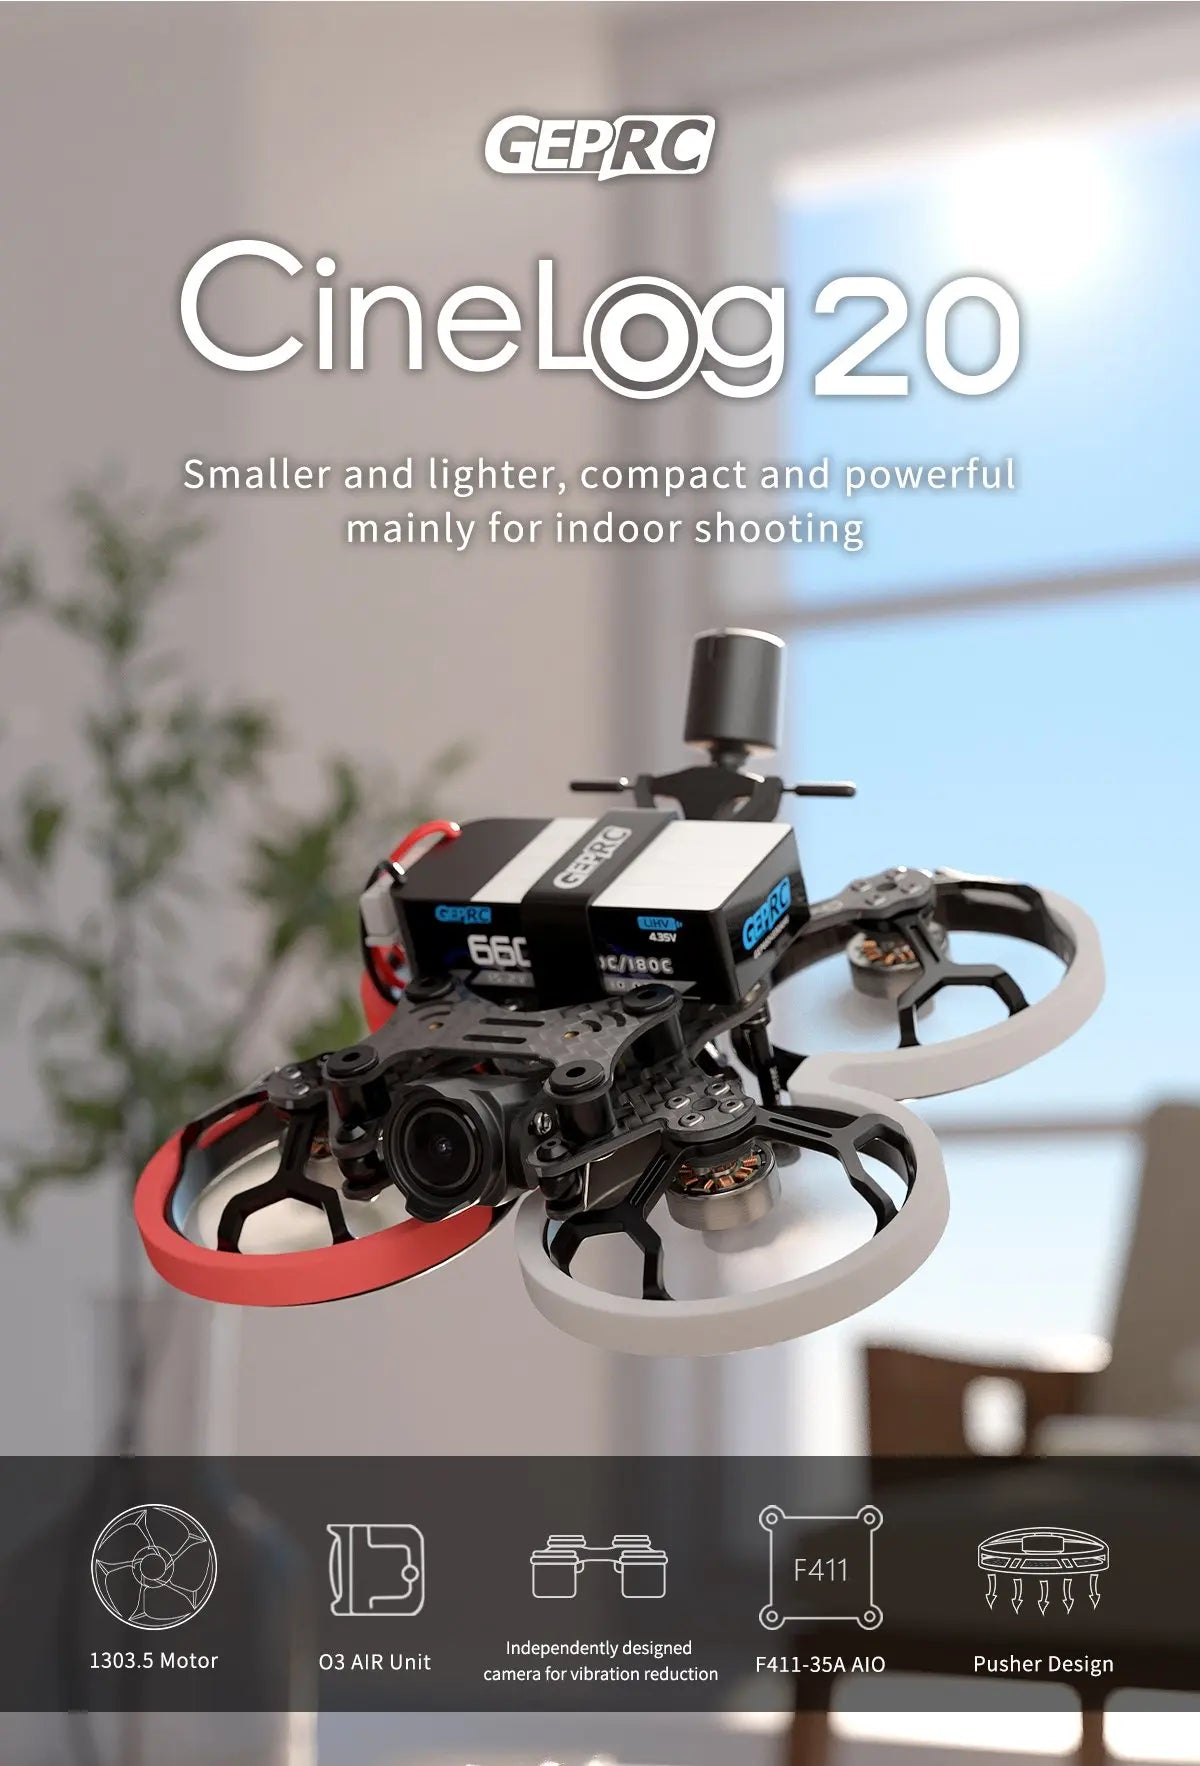 GEPRC Cinelog20 Analog FPV Drone, GEPRC Cinelog20 Smaller and lighter, compact and powerful mainly for indoor shooting